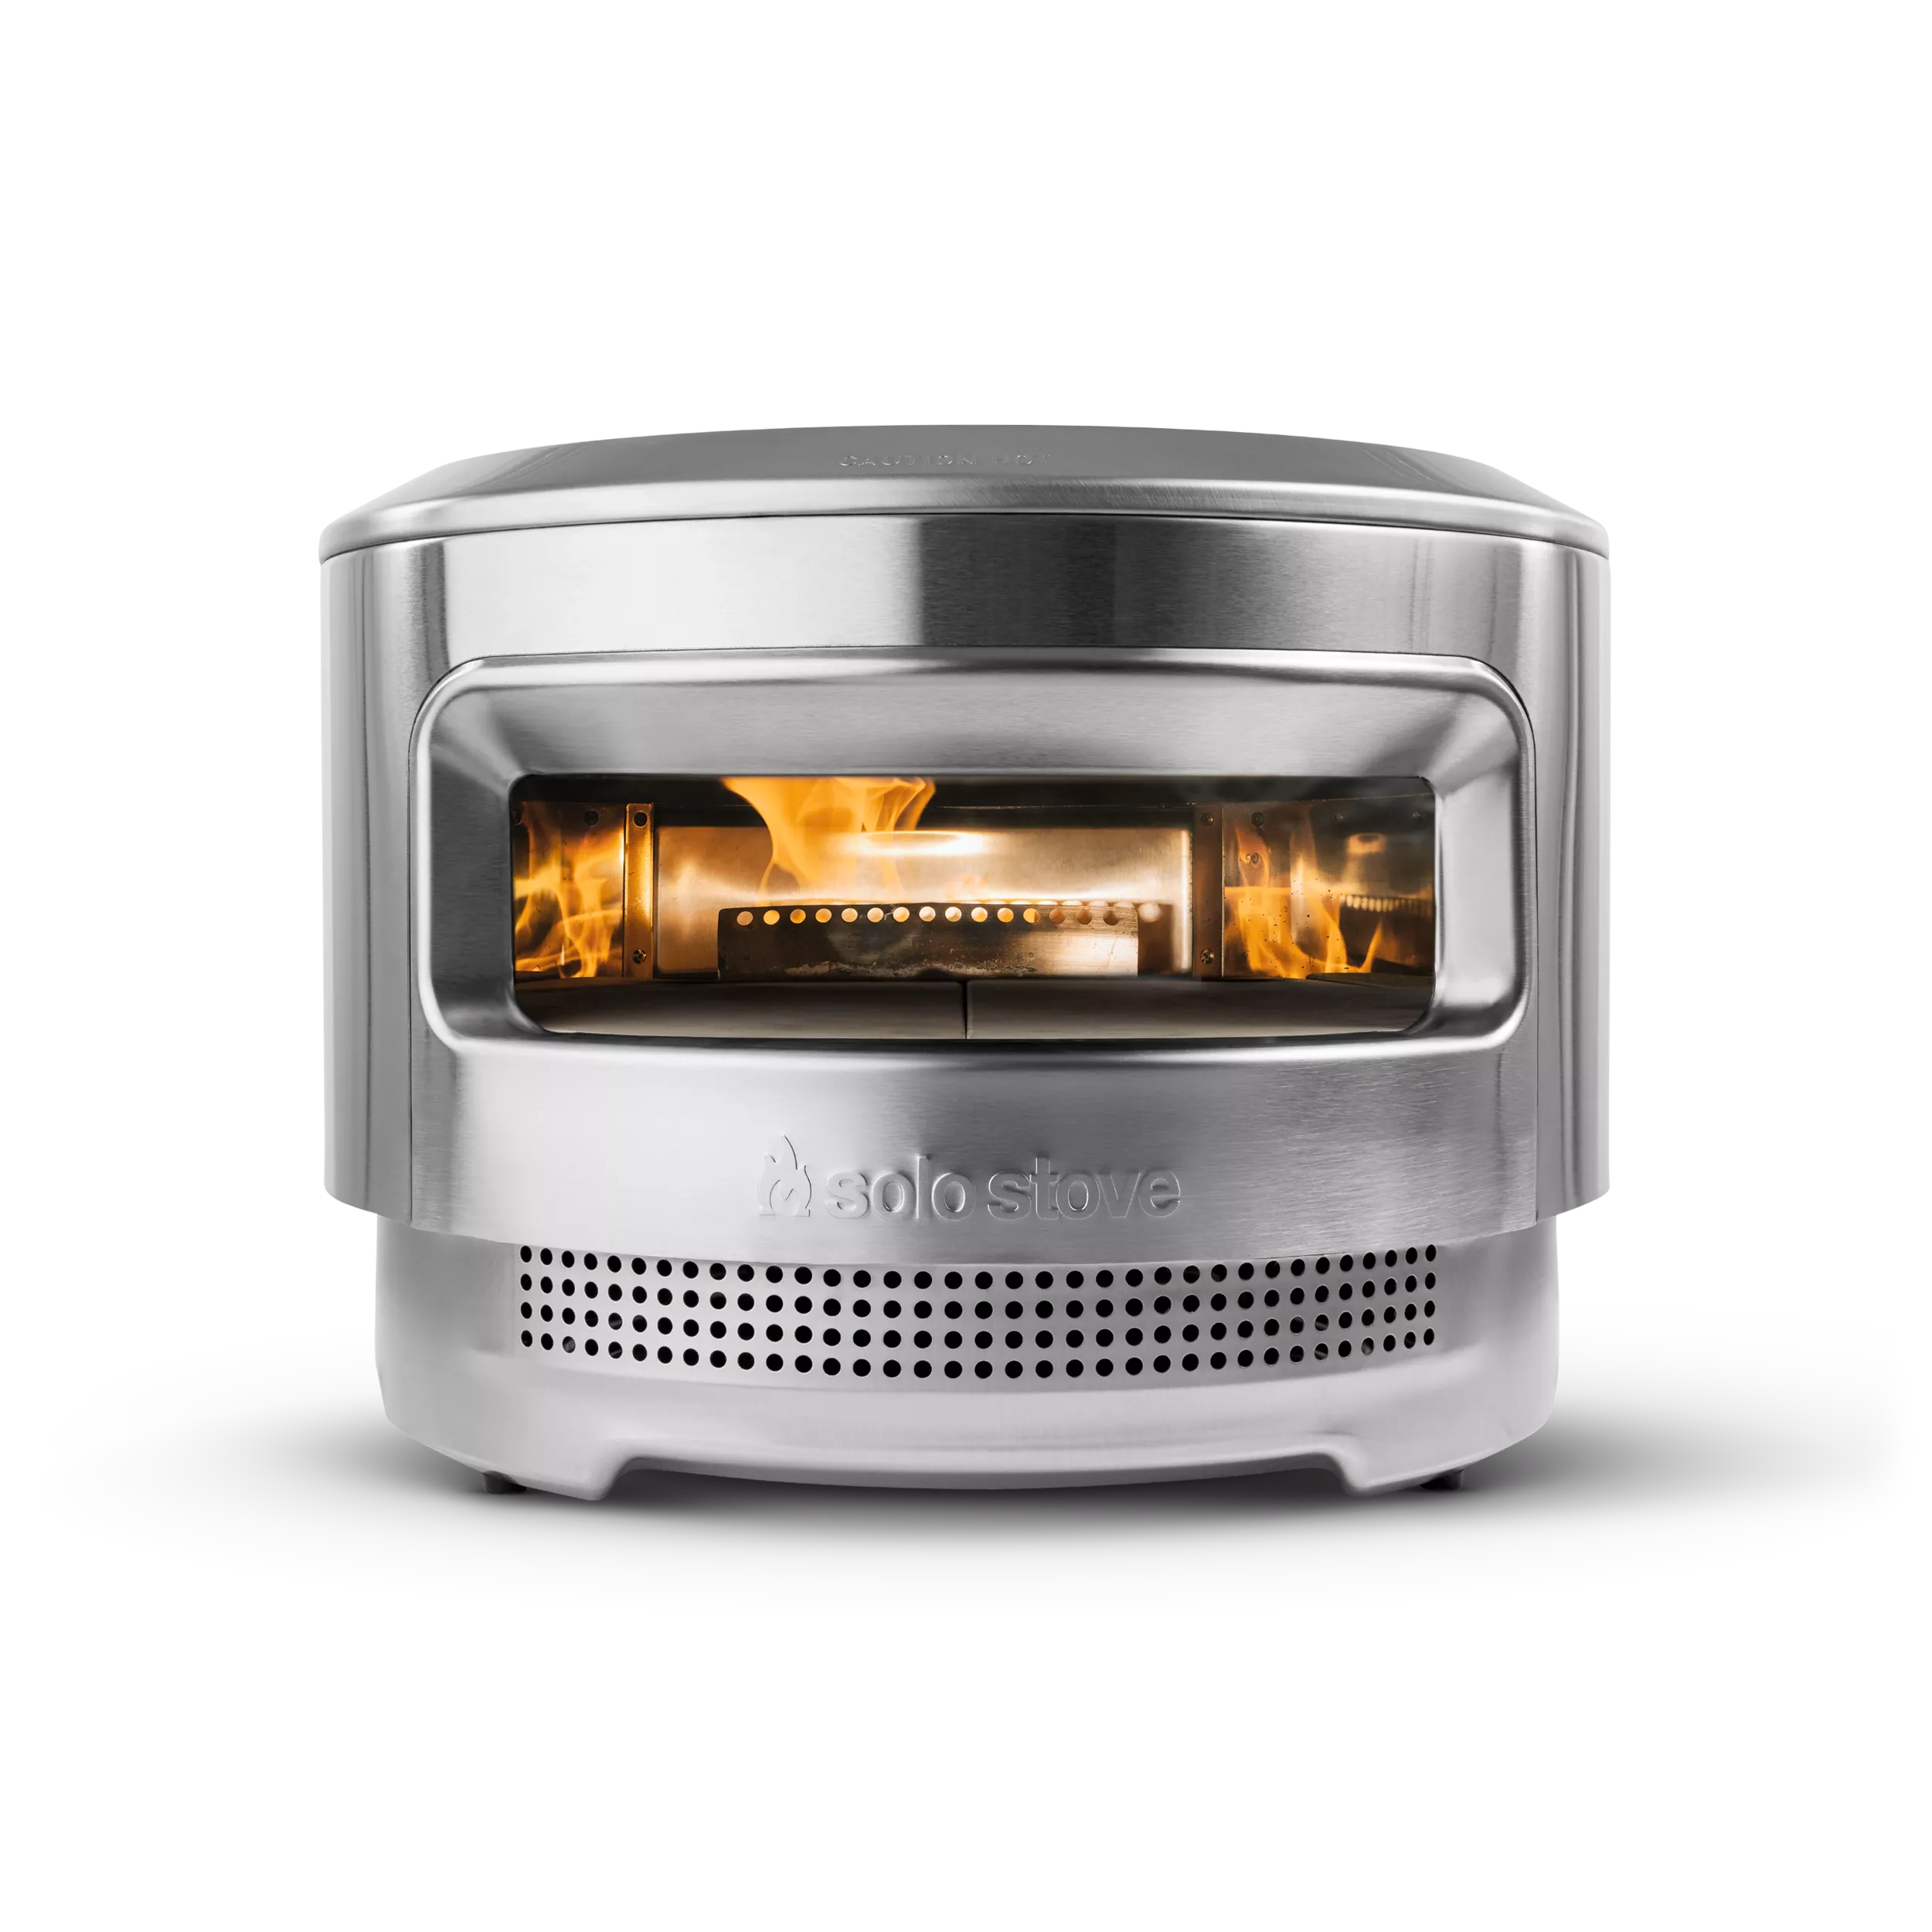 Home Pizza Ovens Are a Scorchingly Hot Kitchen Gift for 2022 - CNET